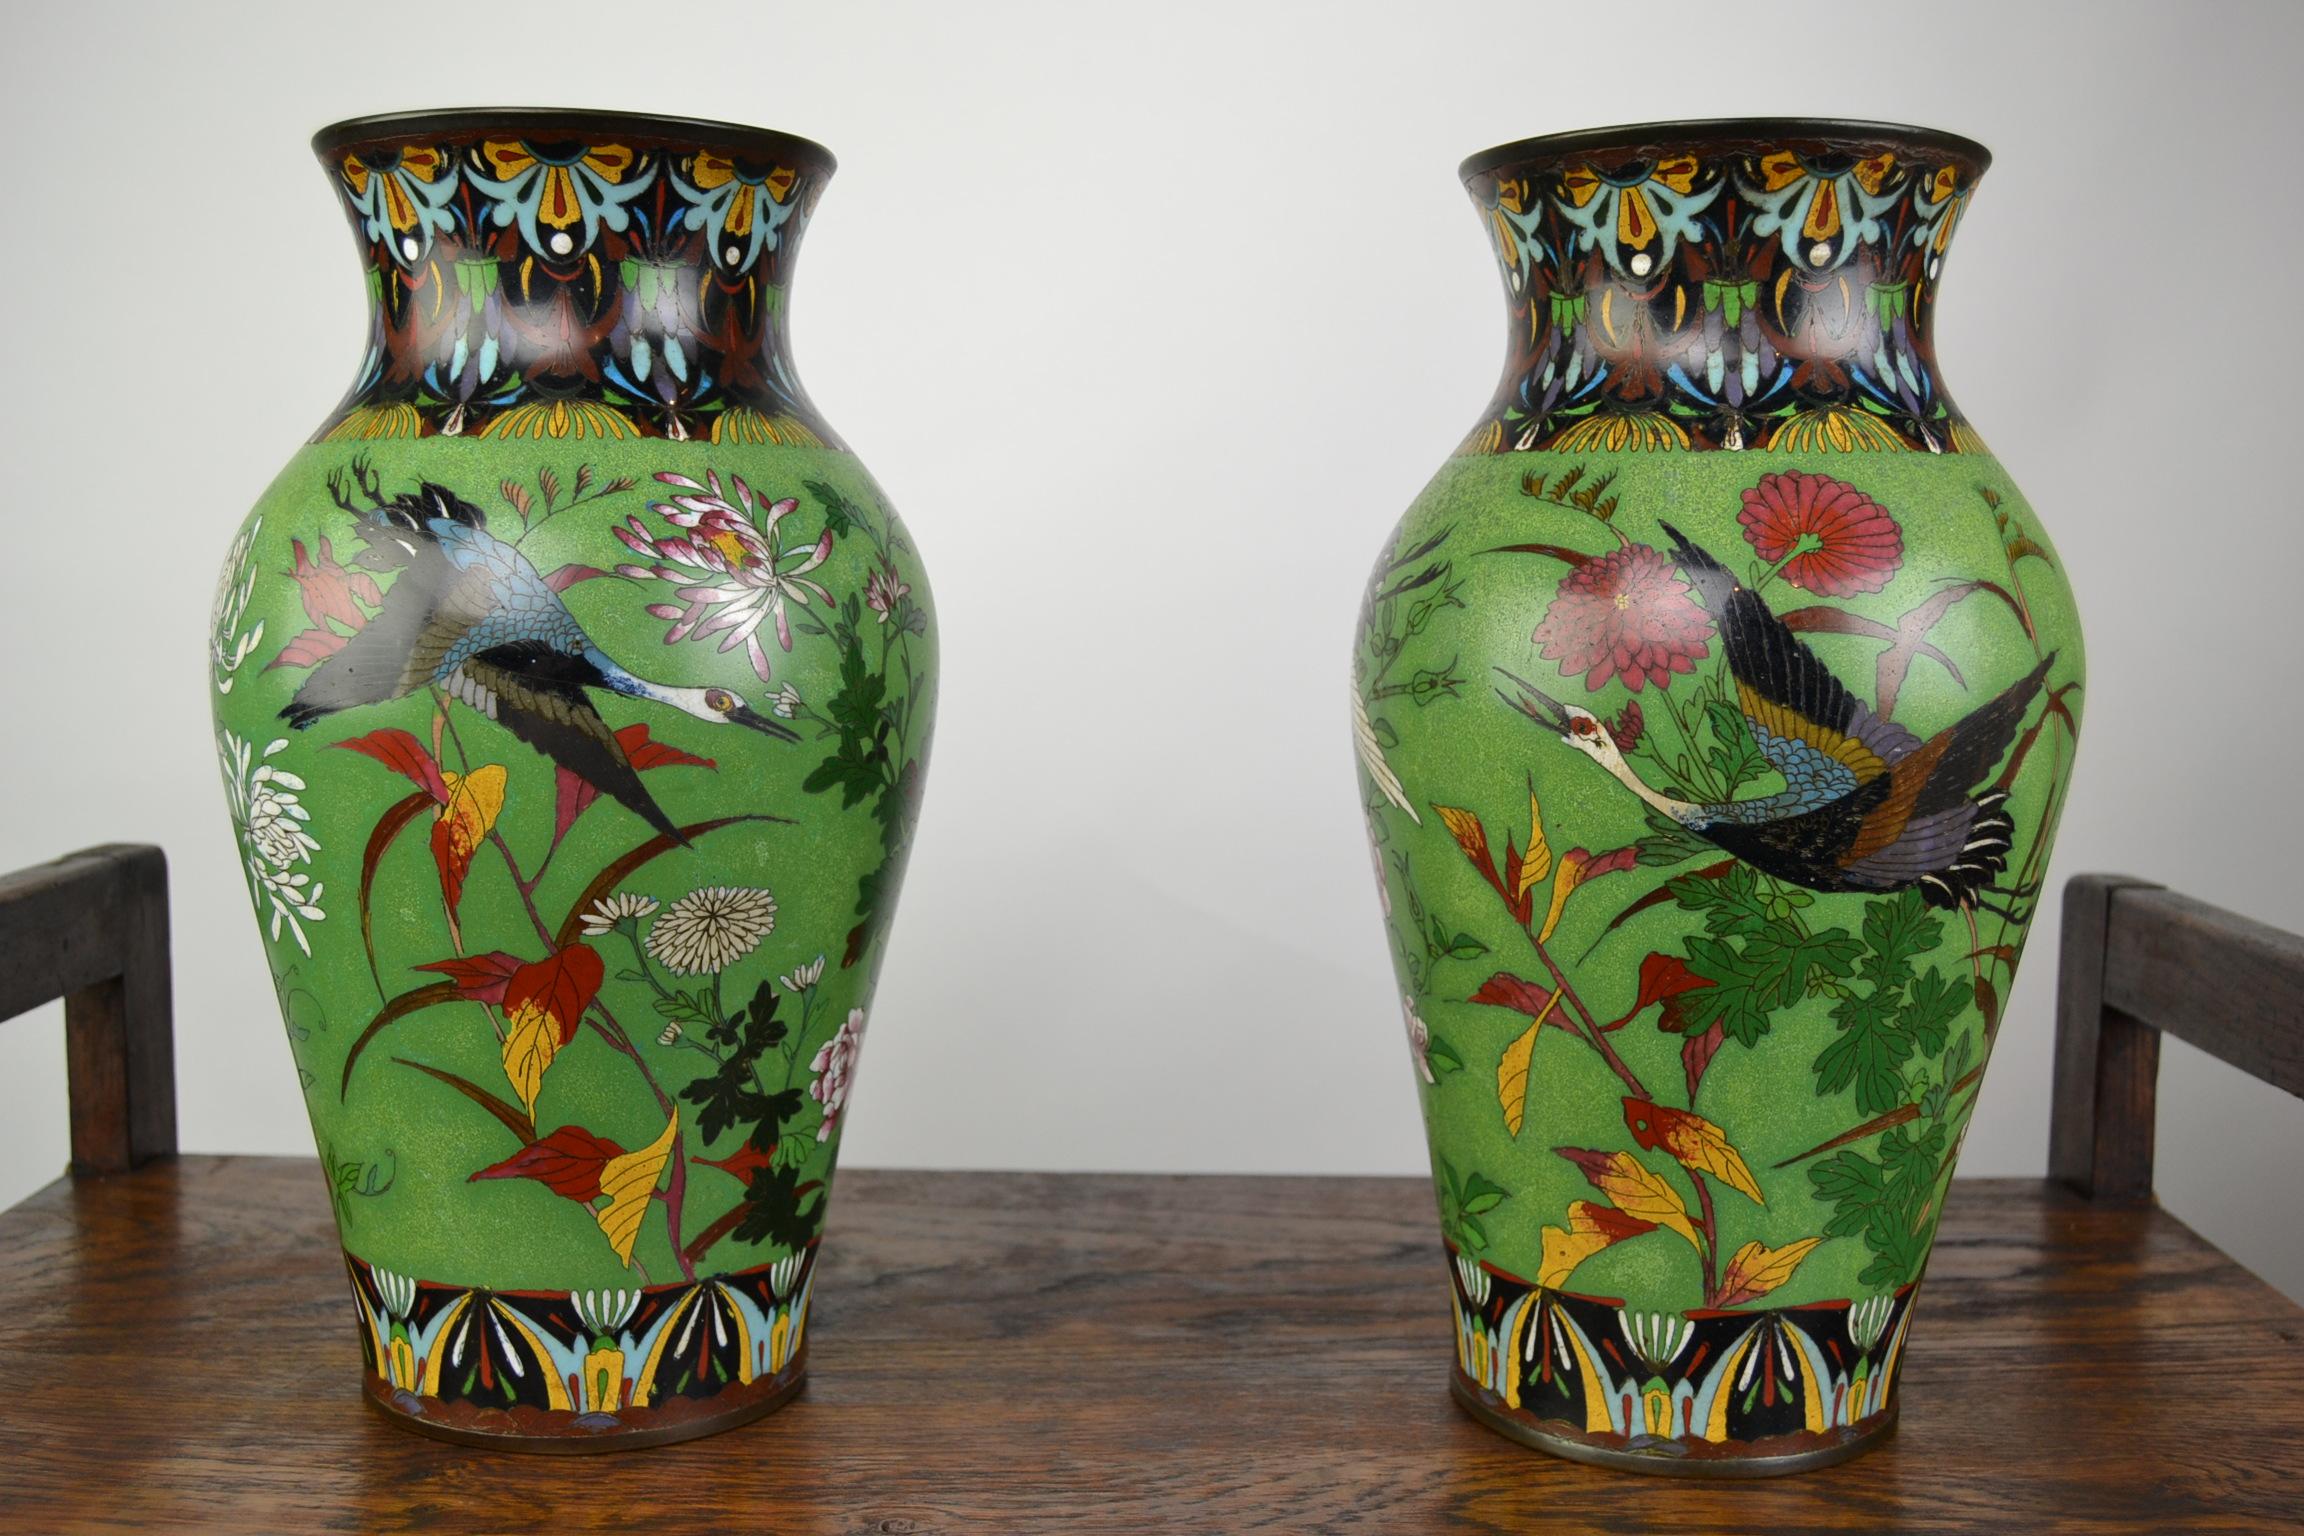 Pair of Art Deco Japanese Enamel on Copper Vases circa 1920 -1930. 
Lime Green Vases with Manchurian Cranes and different flowers , 
like Peonies, Chysanthemums, Irises and other flowering plants. 
Blue Interior and base. 
The Borders around the